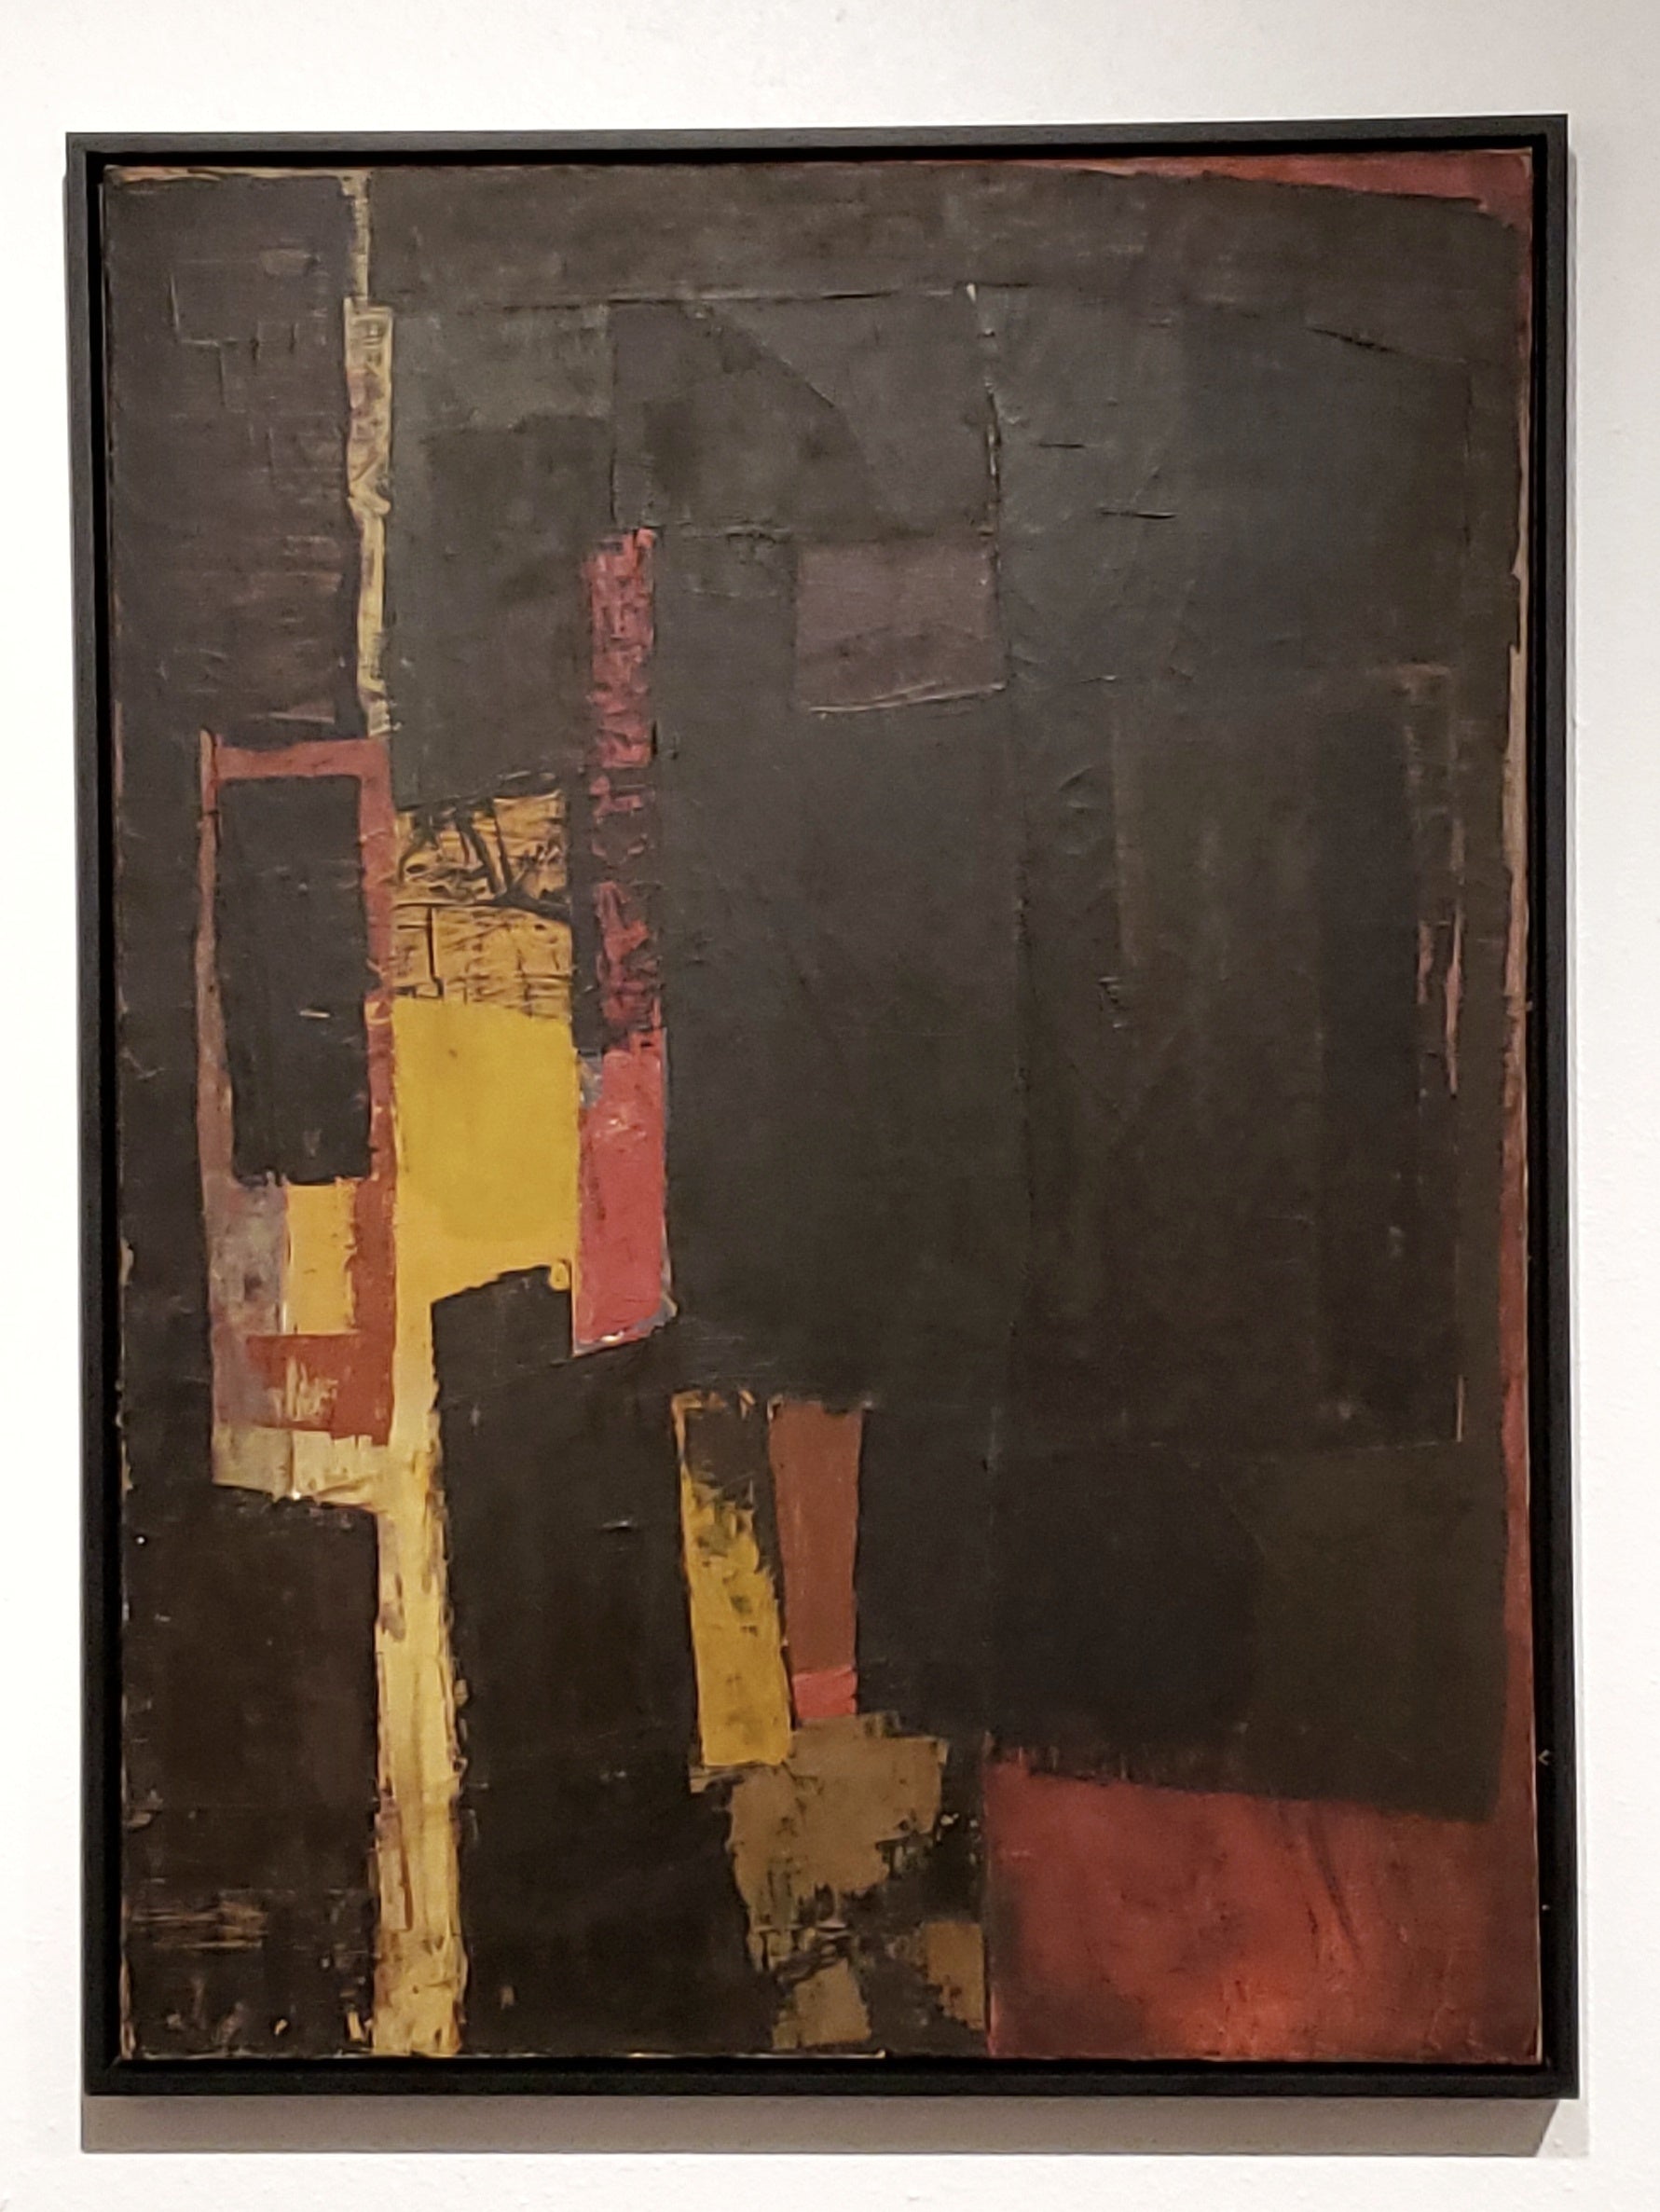 UNTITLED ABSTRACT - OIL ON CANVAS BY BOB RANKIN (1970s)